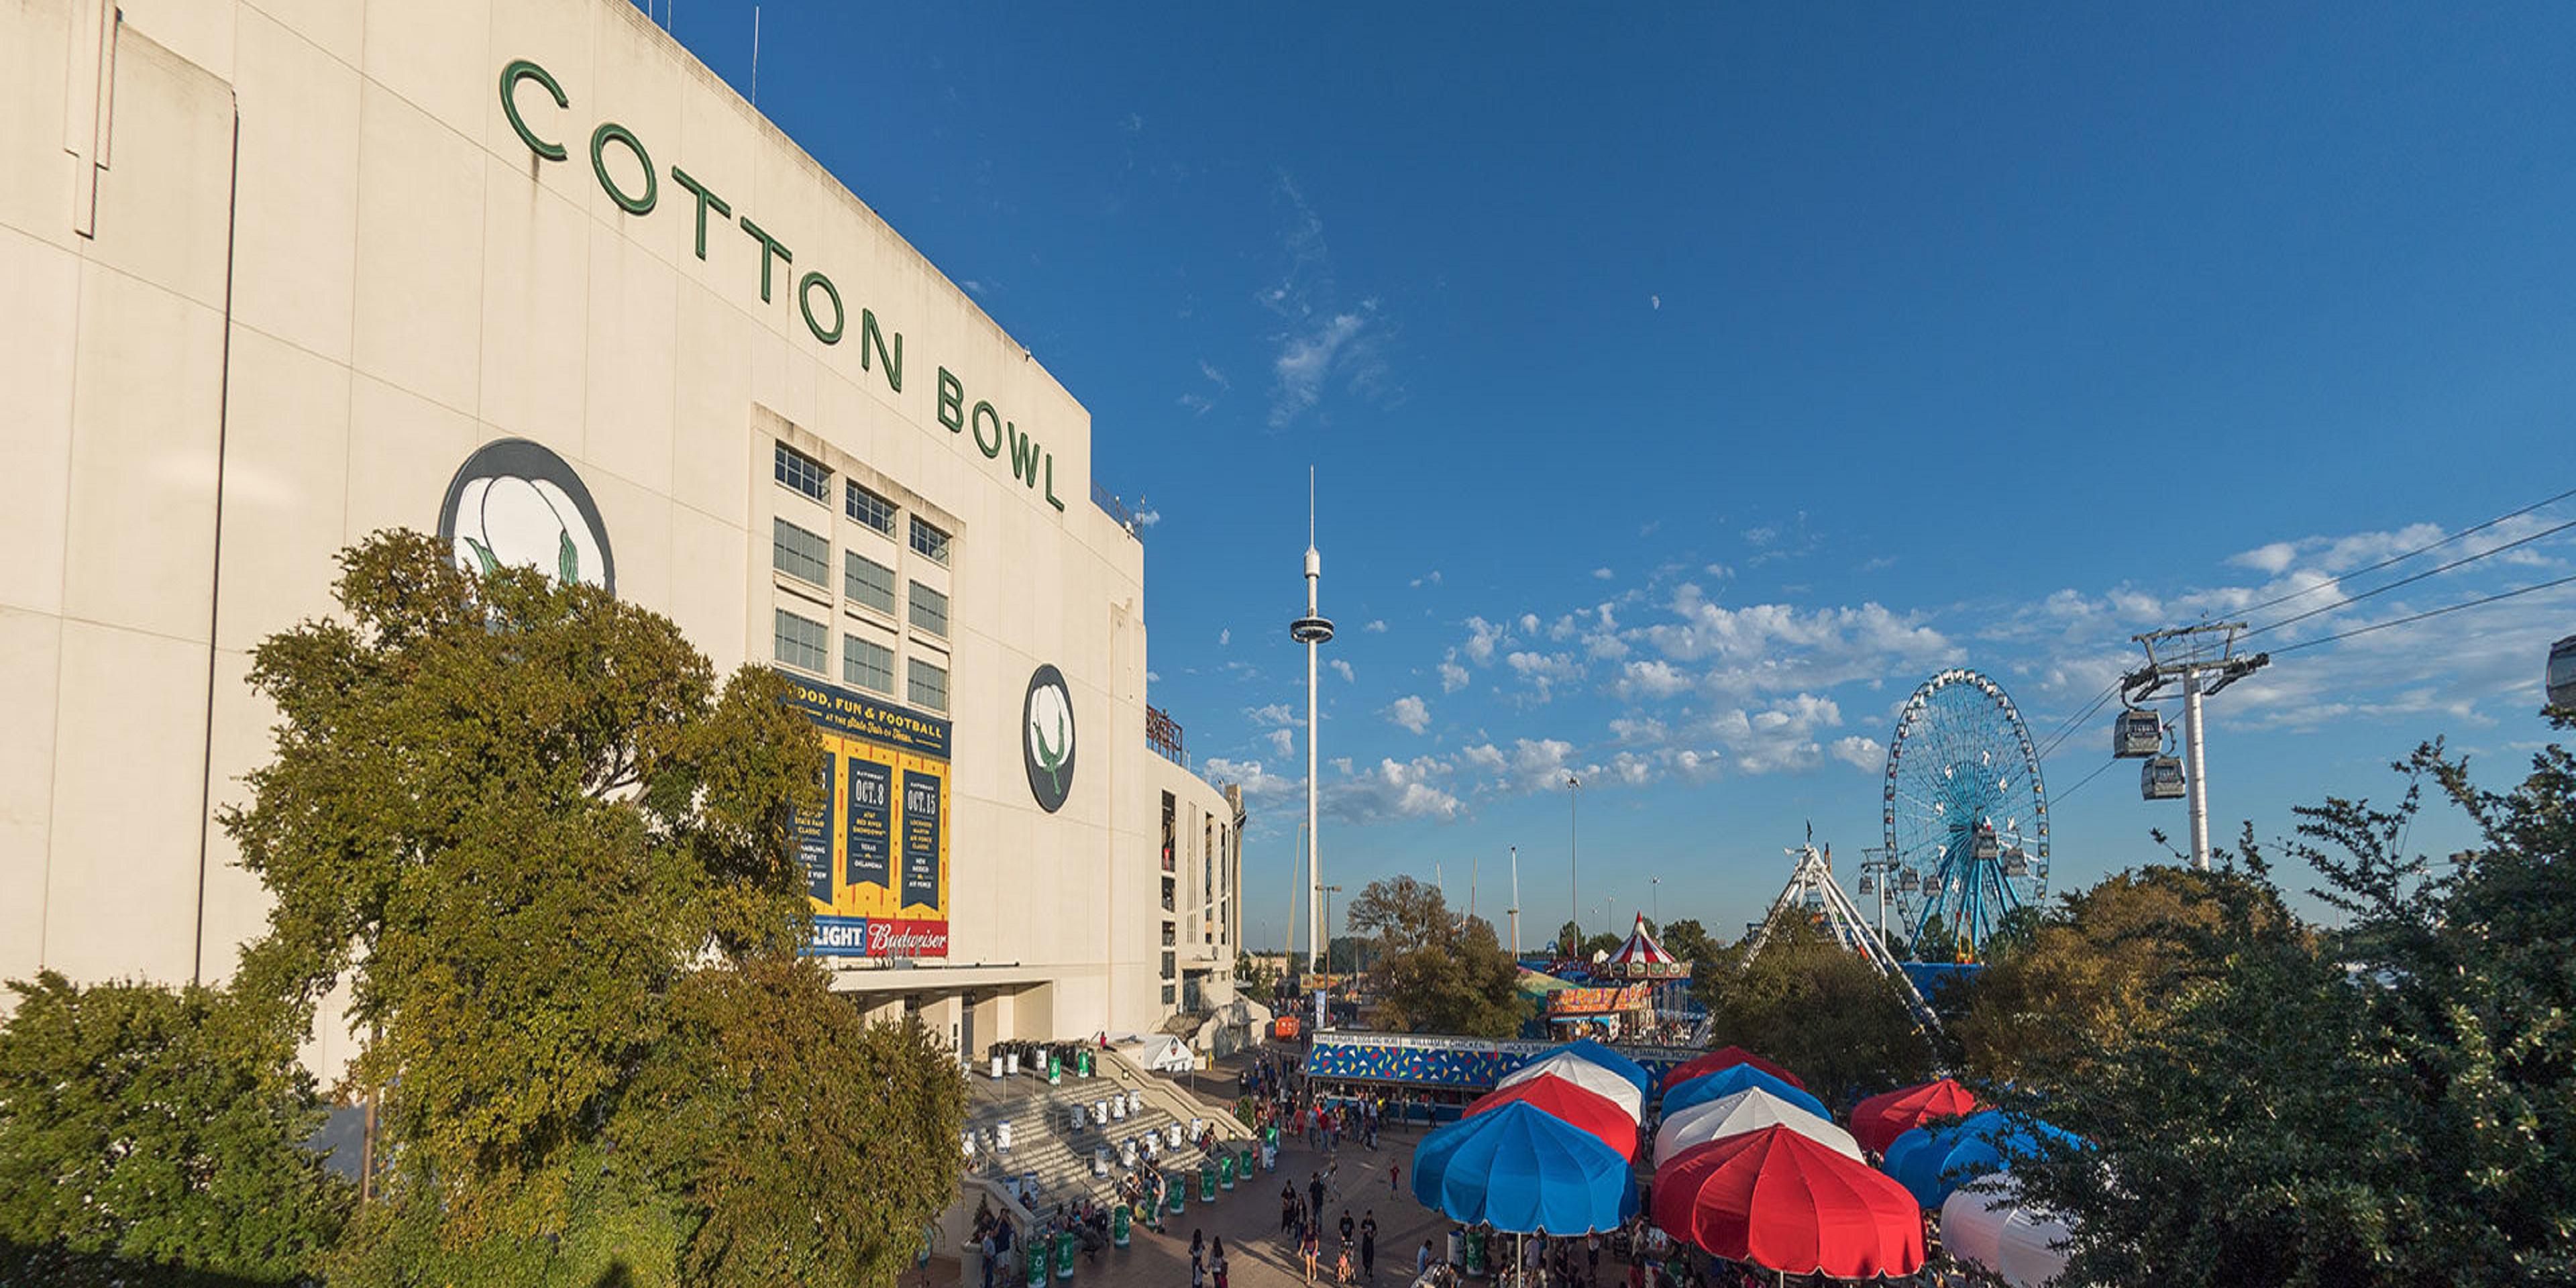 Attend a college football game or other large event at the Cotton Bowl, a multi use stadium located on the grounds of Fair Park, a quick nine minute drive from our hotel.